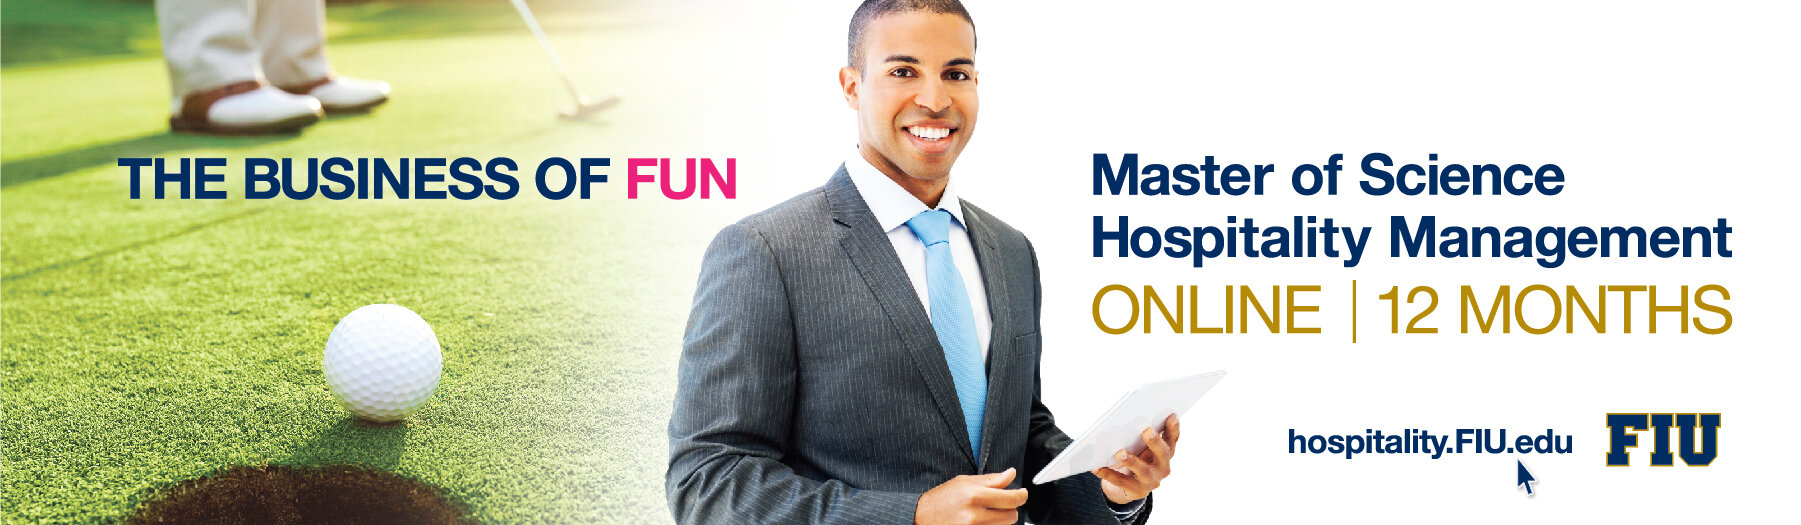 FIU Hospitality Online Master's